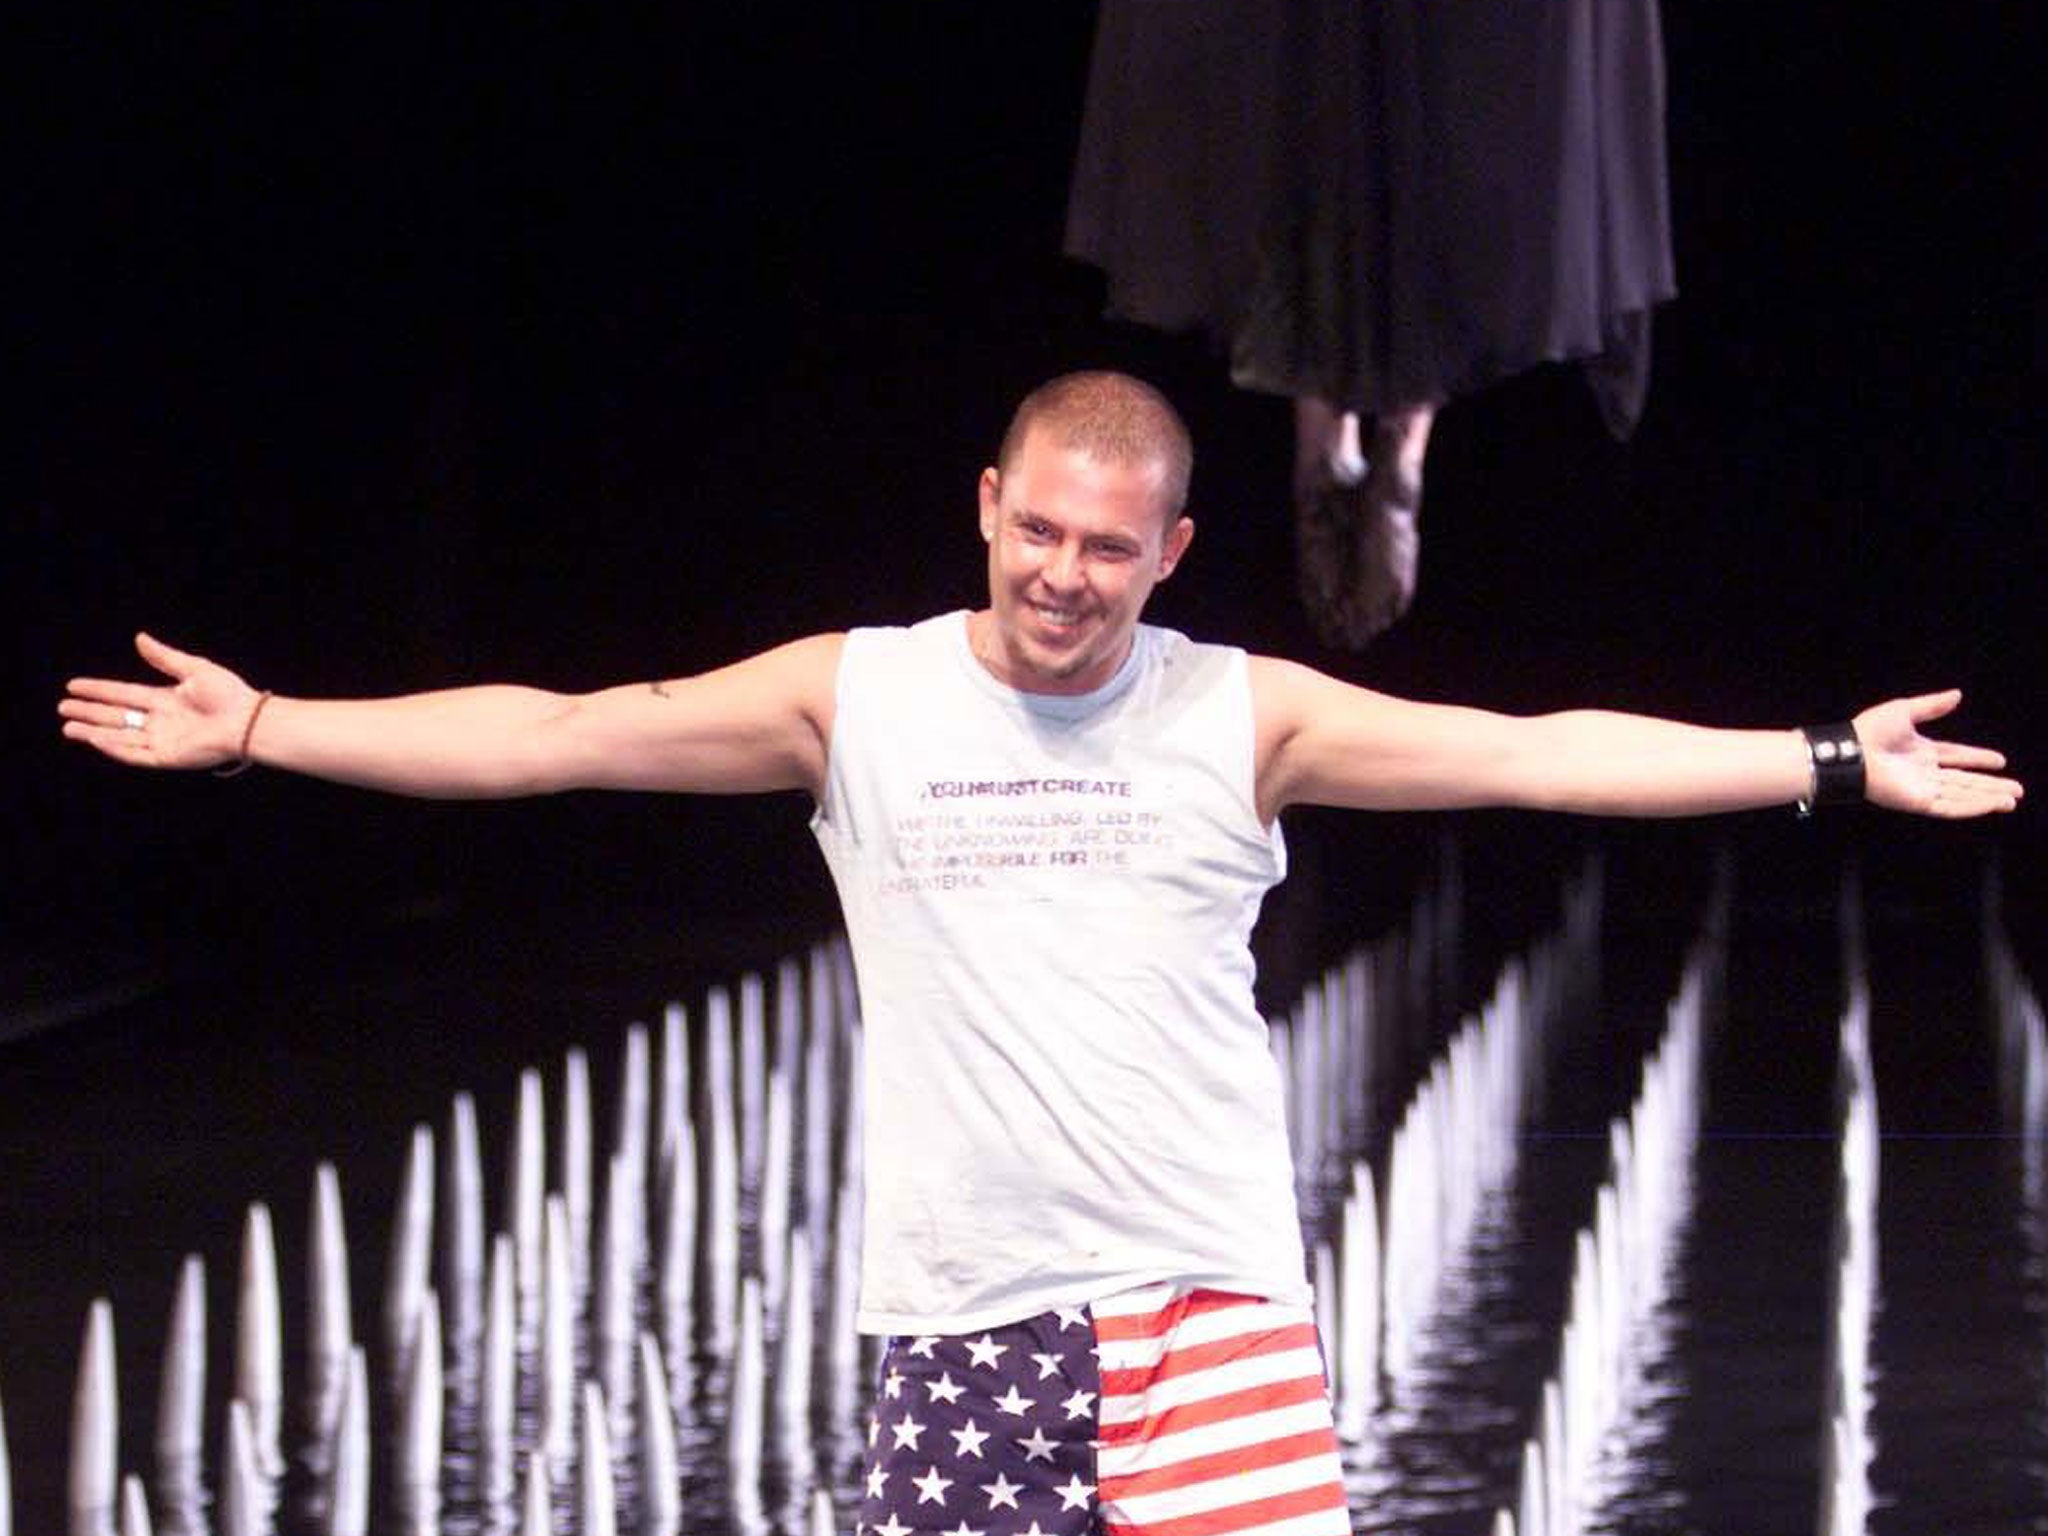 The life and rise of legendary designer Alexander McQueen, who